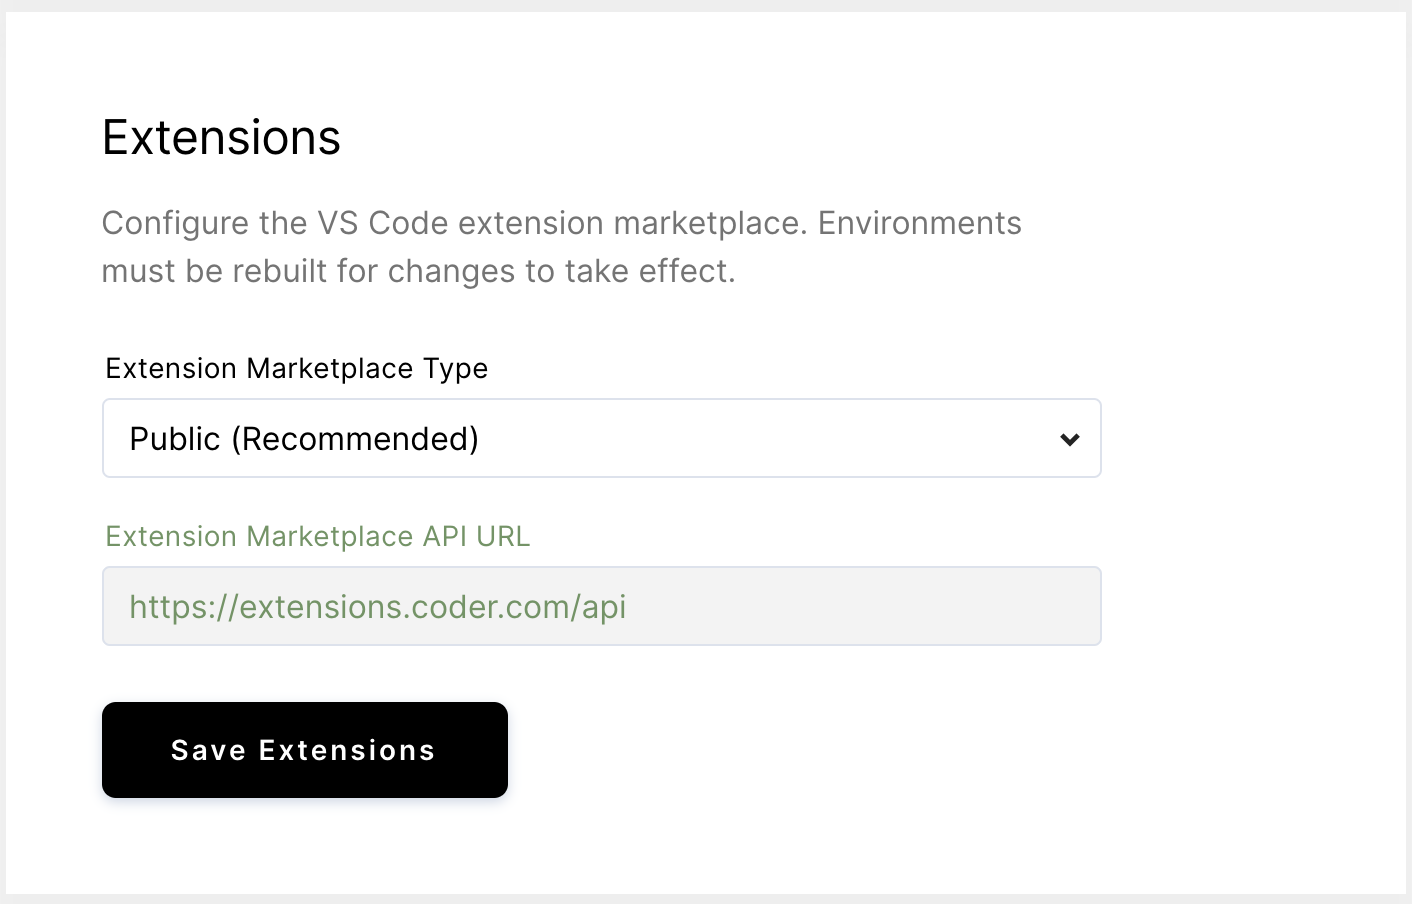 Configuring extensions marketplace